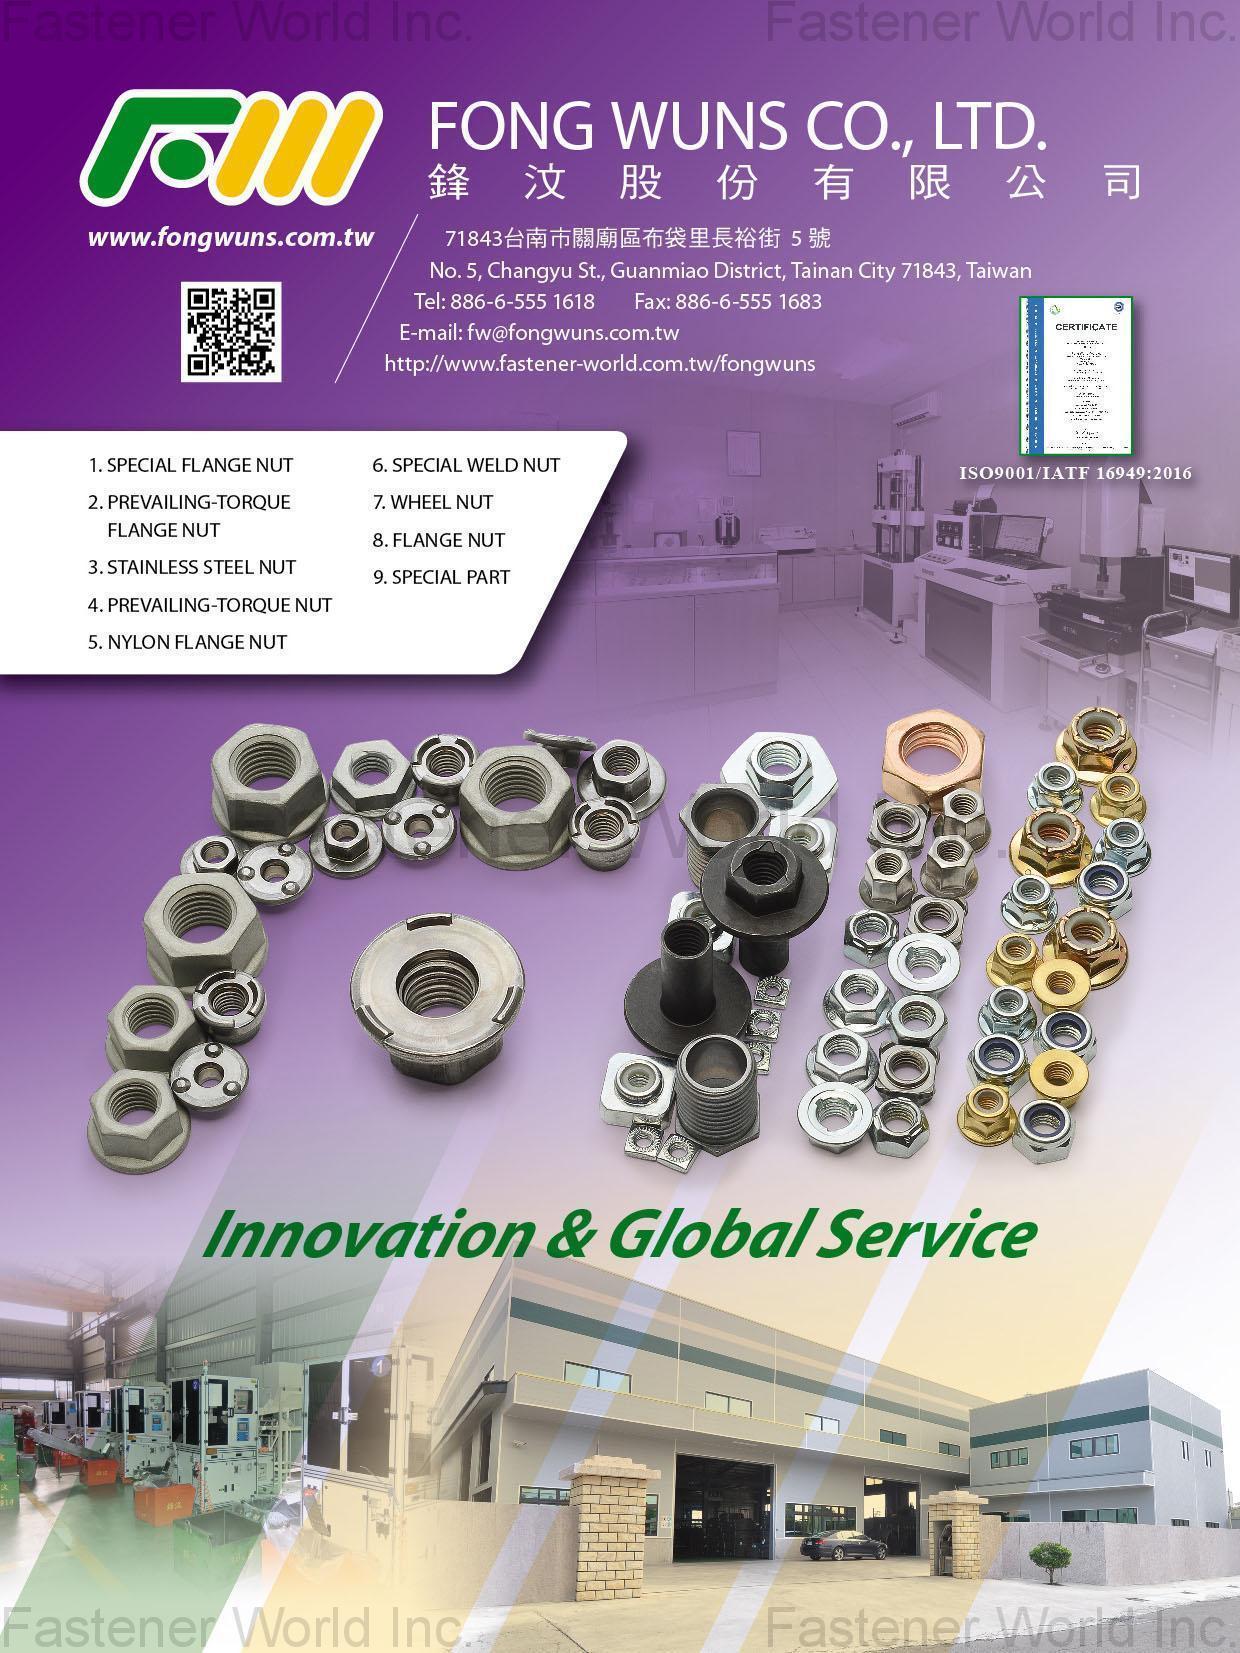 FONG WUNS CO., LTD.  , Special Flange Nut, Prevailing-Torque Flange Nut, Stainless Steel Nut ,Prevailing-Torque Nut, Nylon Flange Nut, Special Weld Nut, Wheel Nut, Flange Nut, Special Part , Flange Nuts